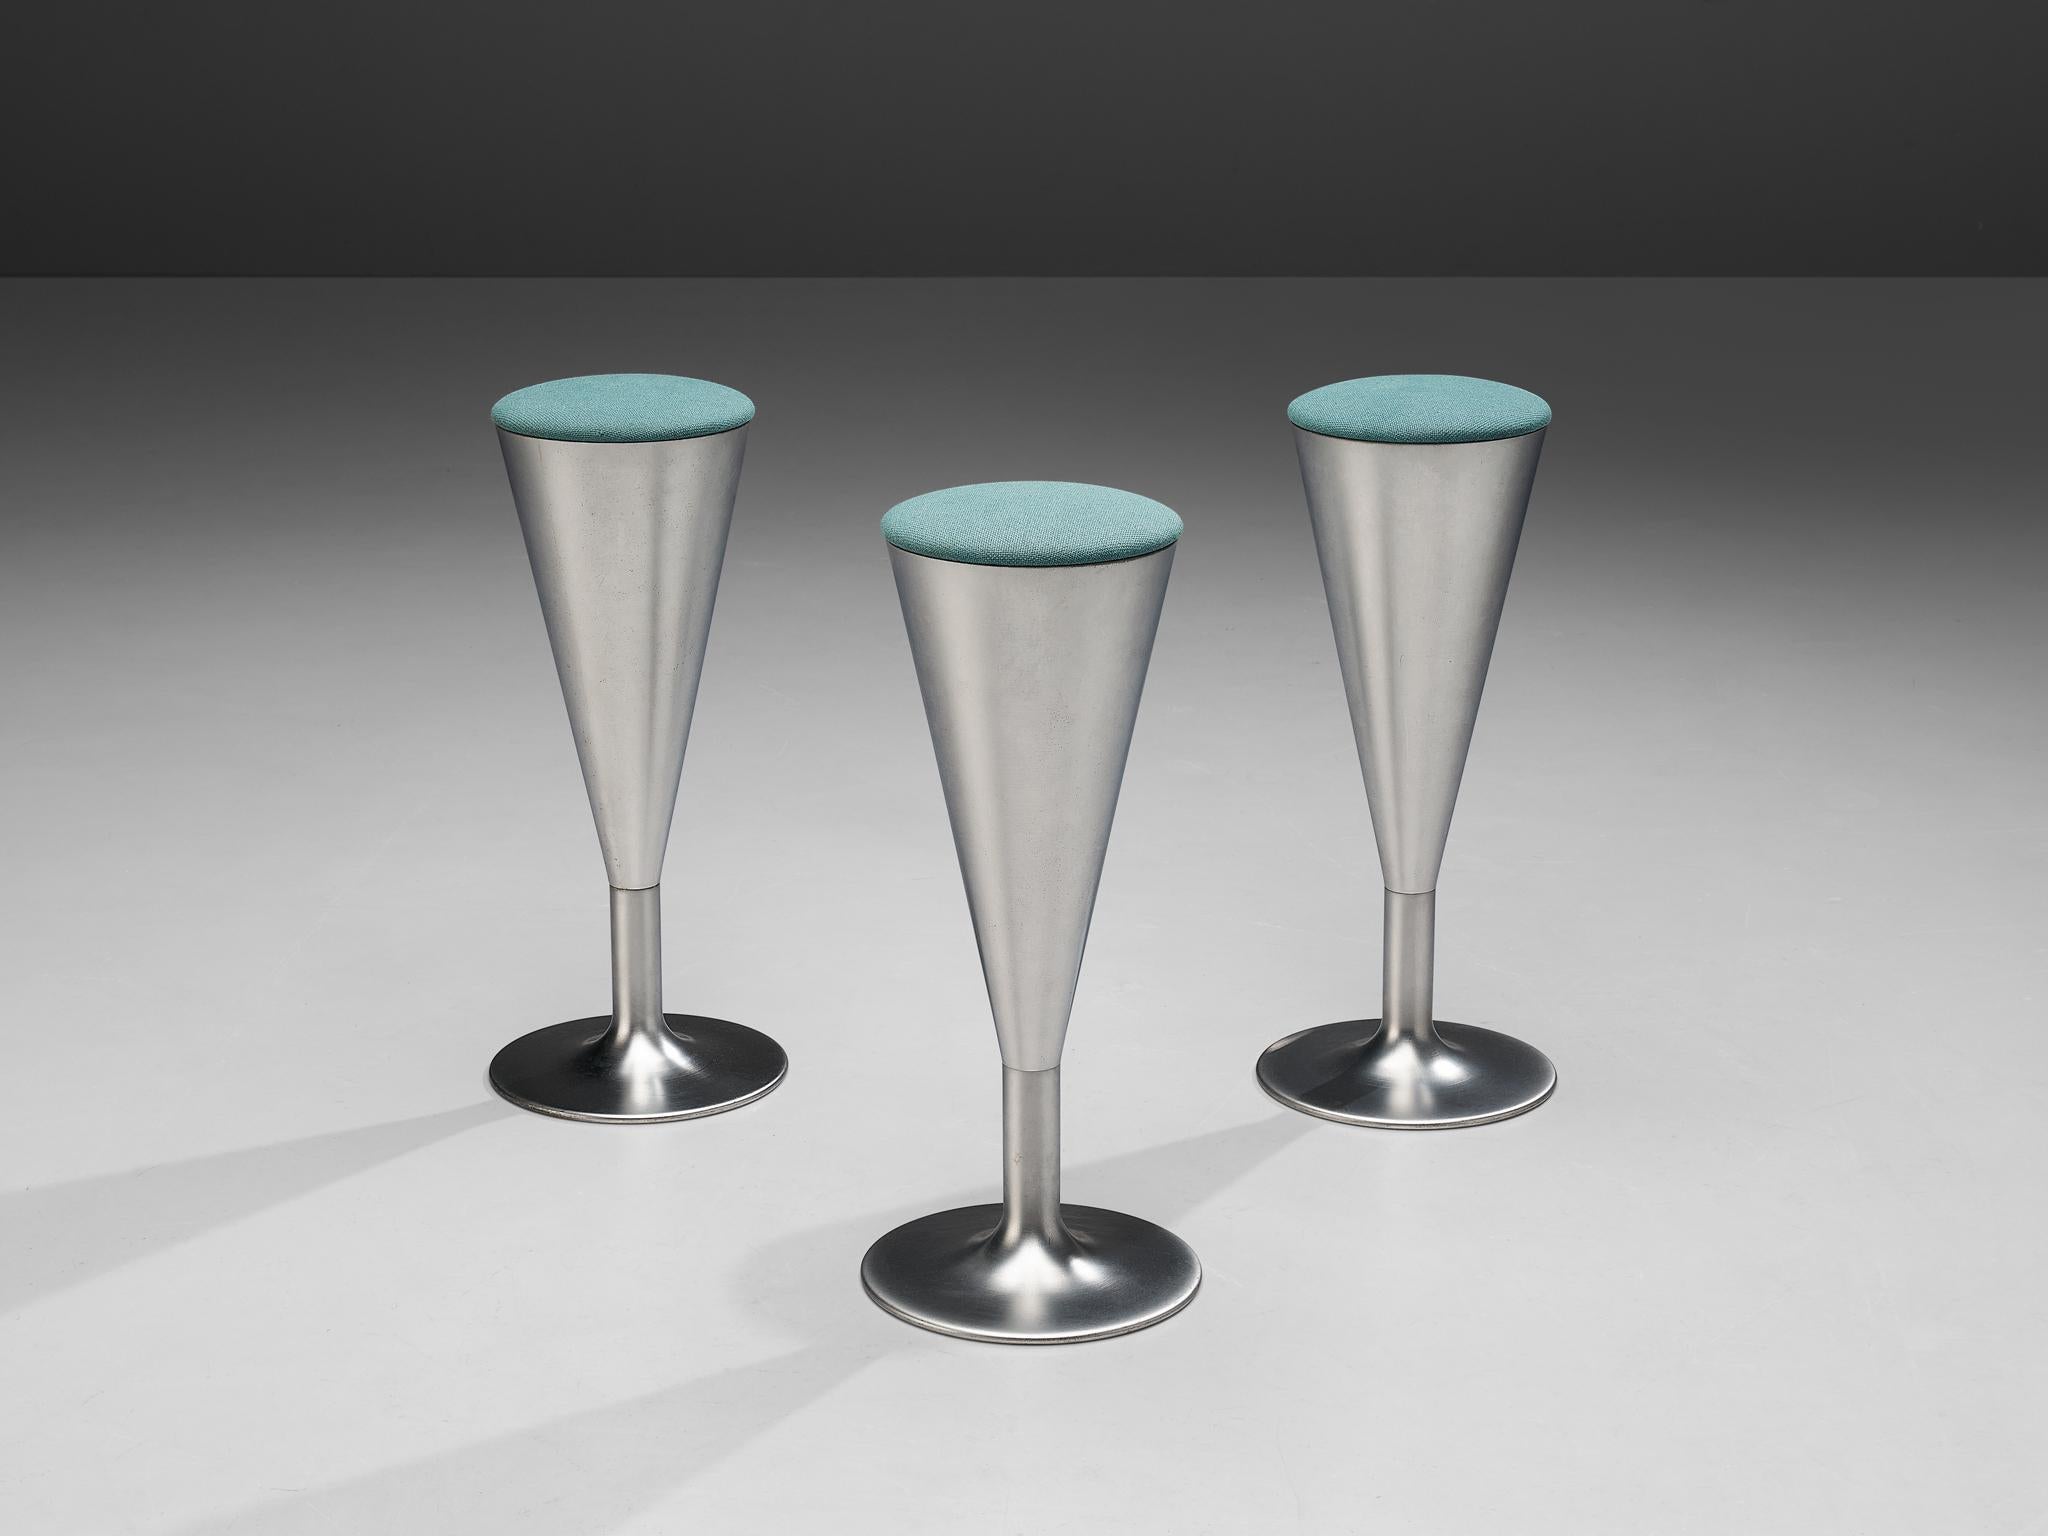 Leo Thafvelin for Johanson design, set of three bar stools, steel, turquoise fabric upholstery, Sweden, 1960s

This eccentric set of three bar stools is designed by the Swedish designer Leo Thafvelin. The stools are executed in fabric for the seat